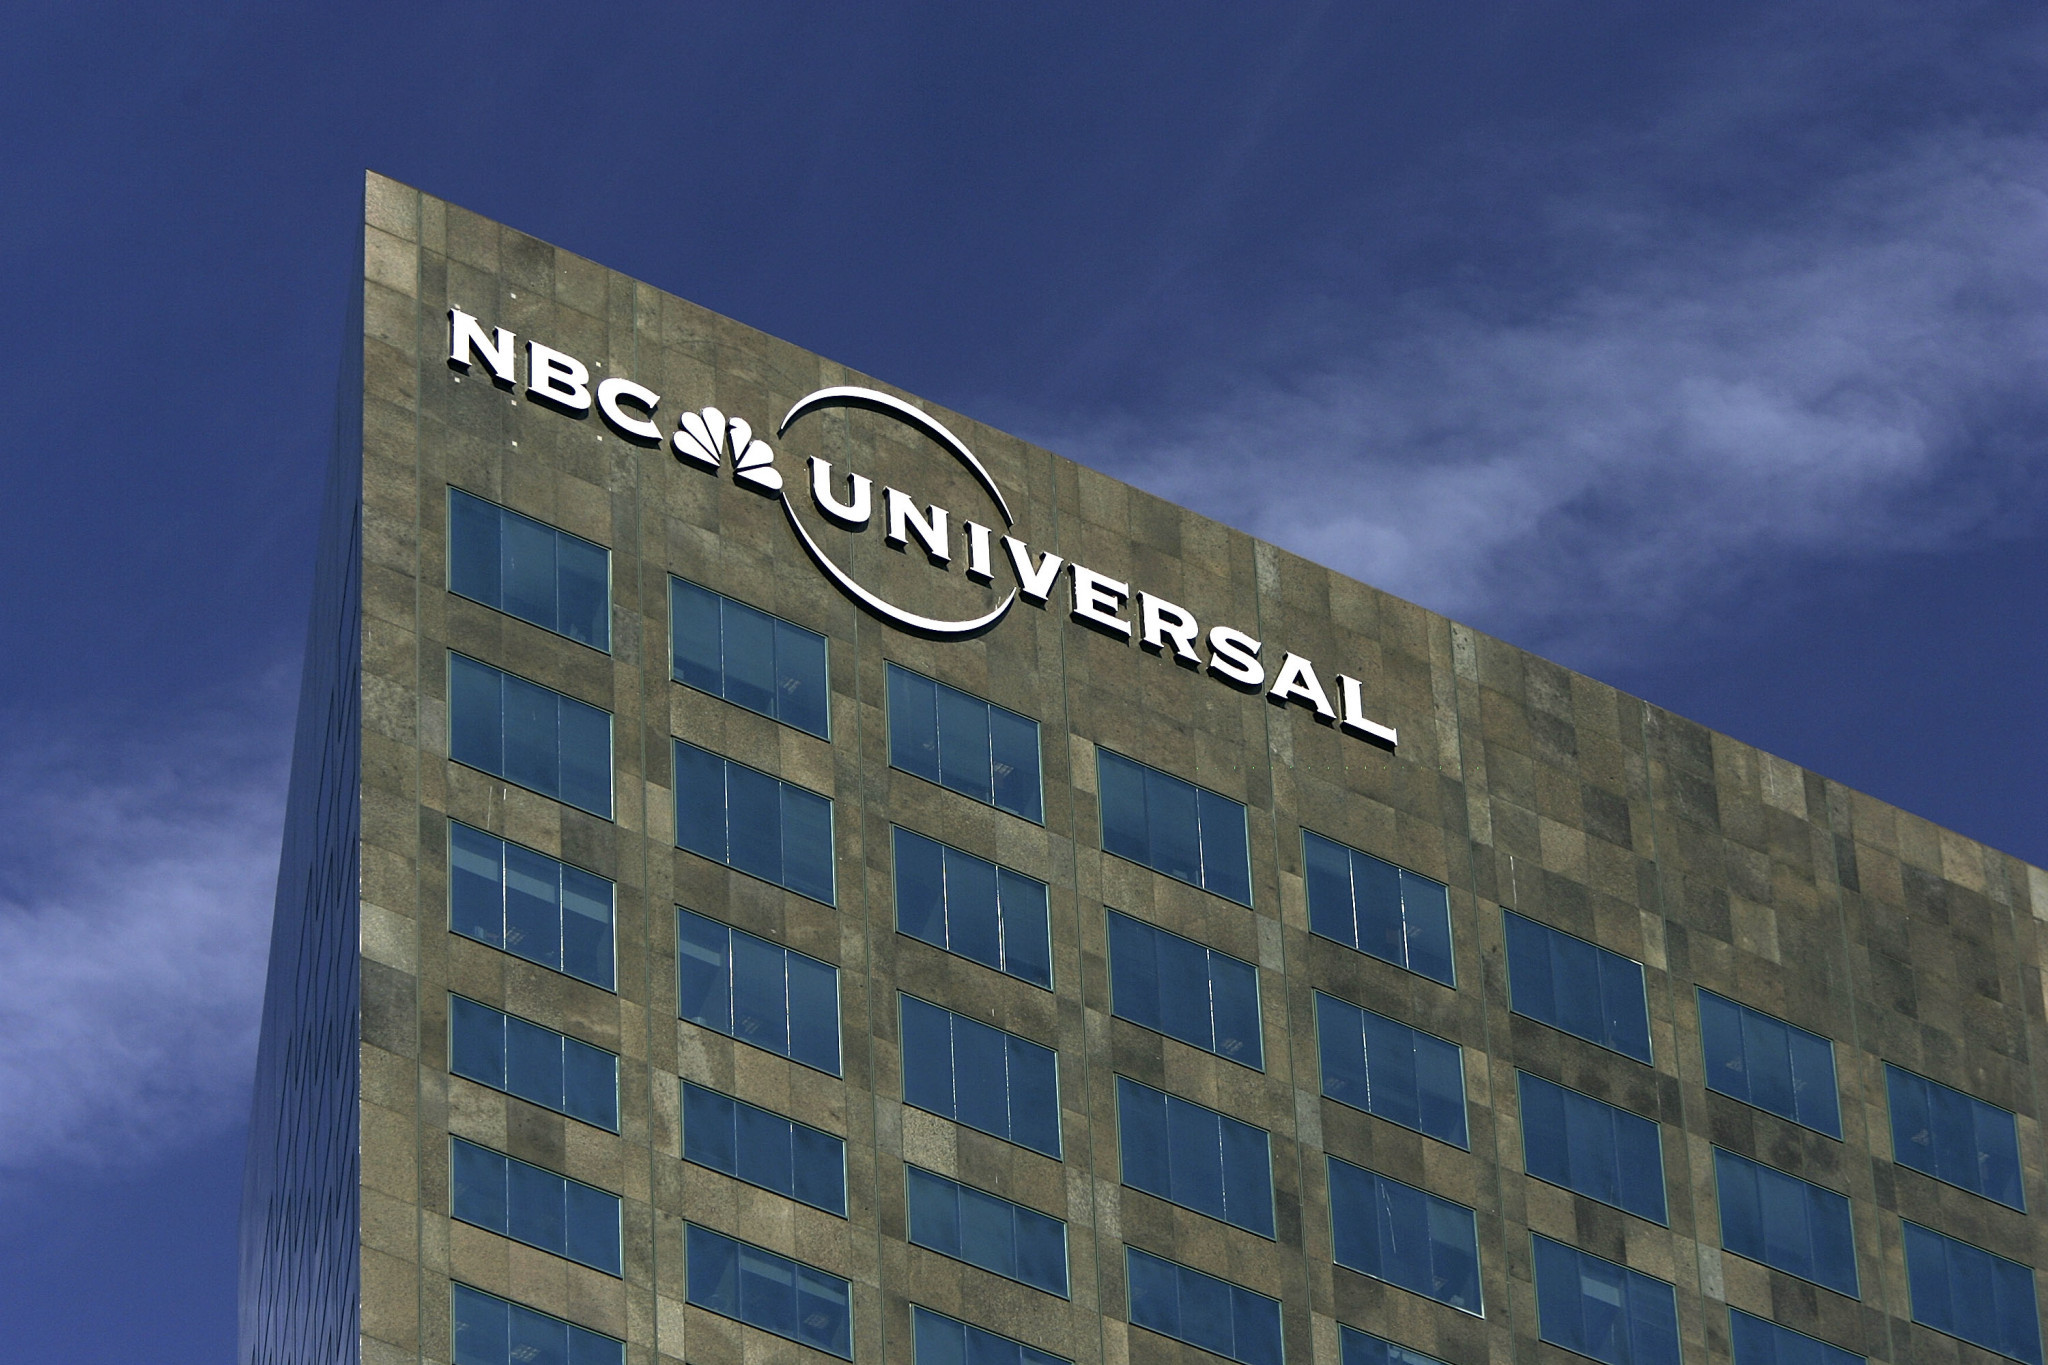 NBCUniversal's advertising revenue has fallen sharply ©Getty Images